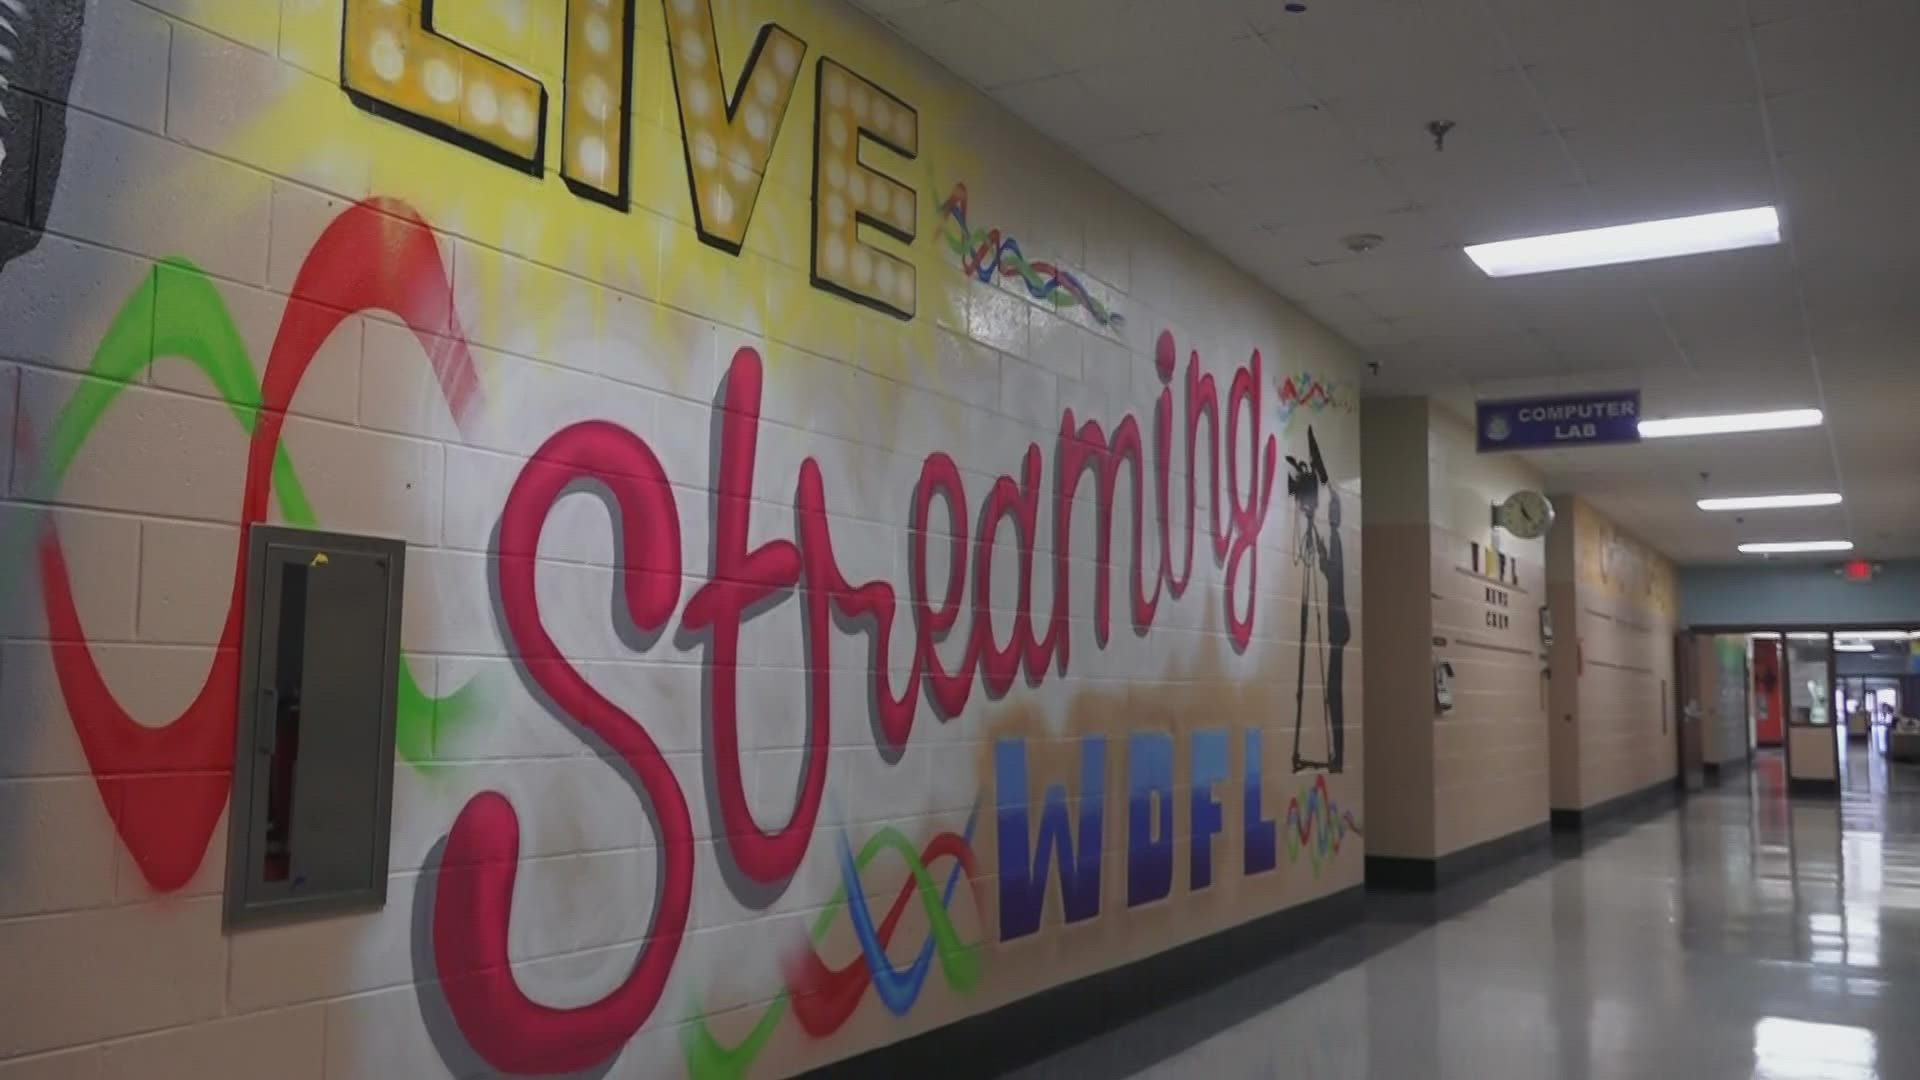 Dogwood Elementary in Knox County is focused on creating a positive learning environment for students. The art on the walls isn't typical, but it's impactful.